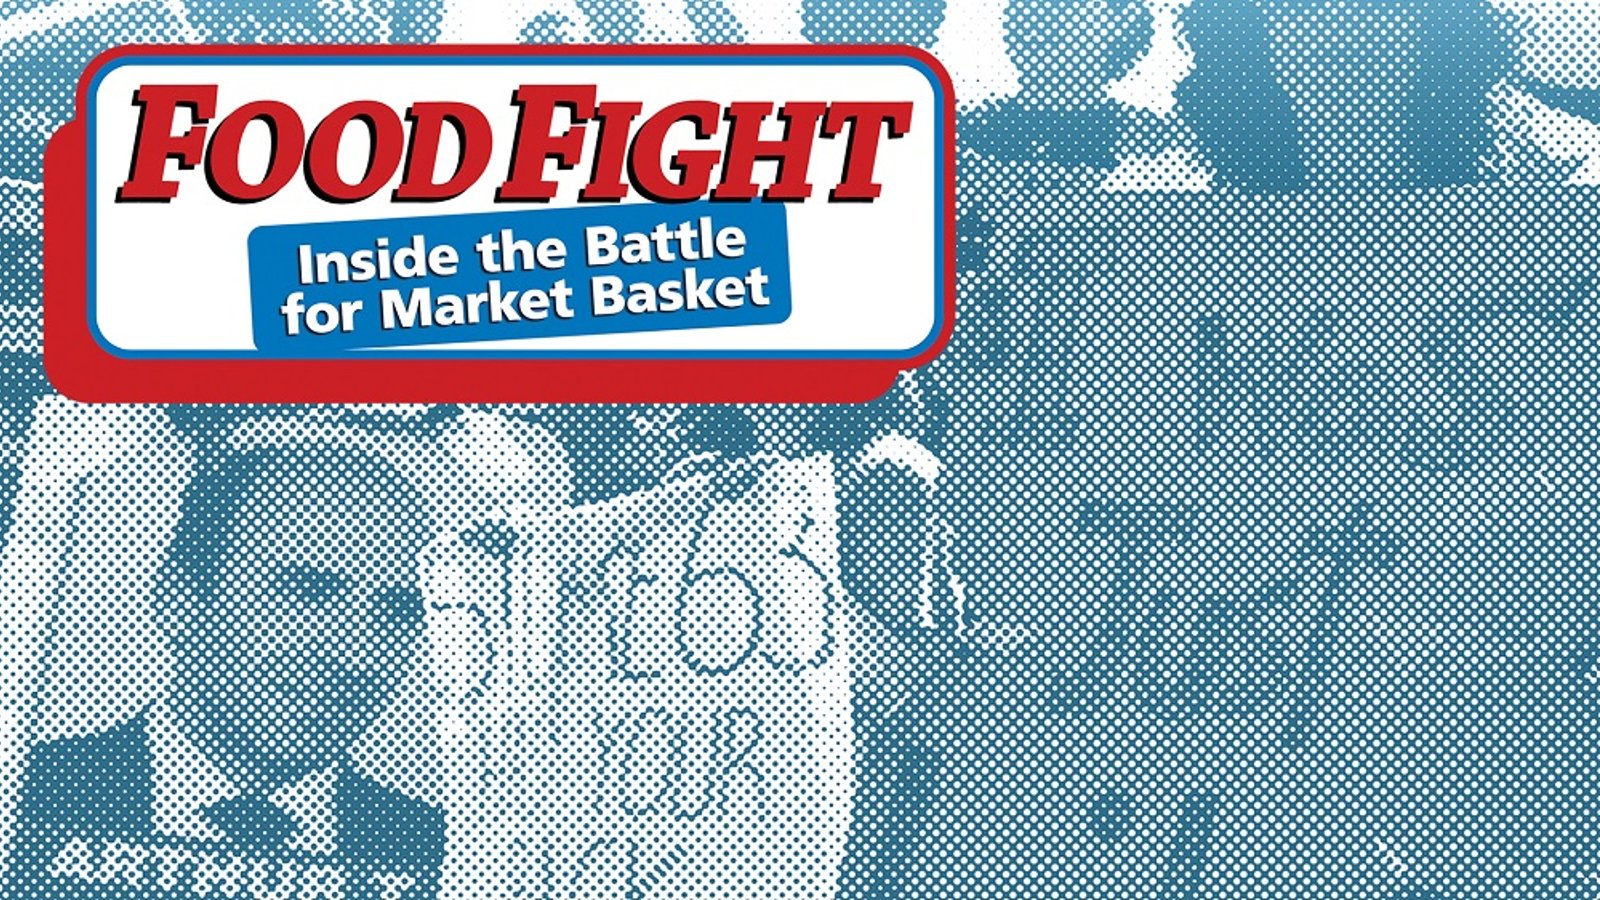 Food Fight - The Corporate Battle of a New England Grocery Chain